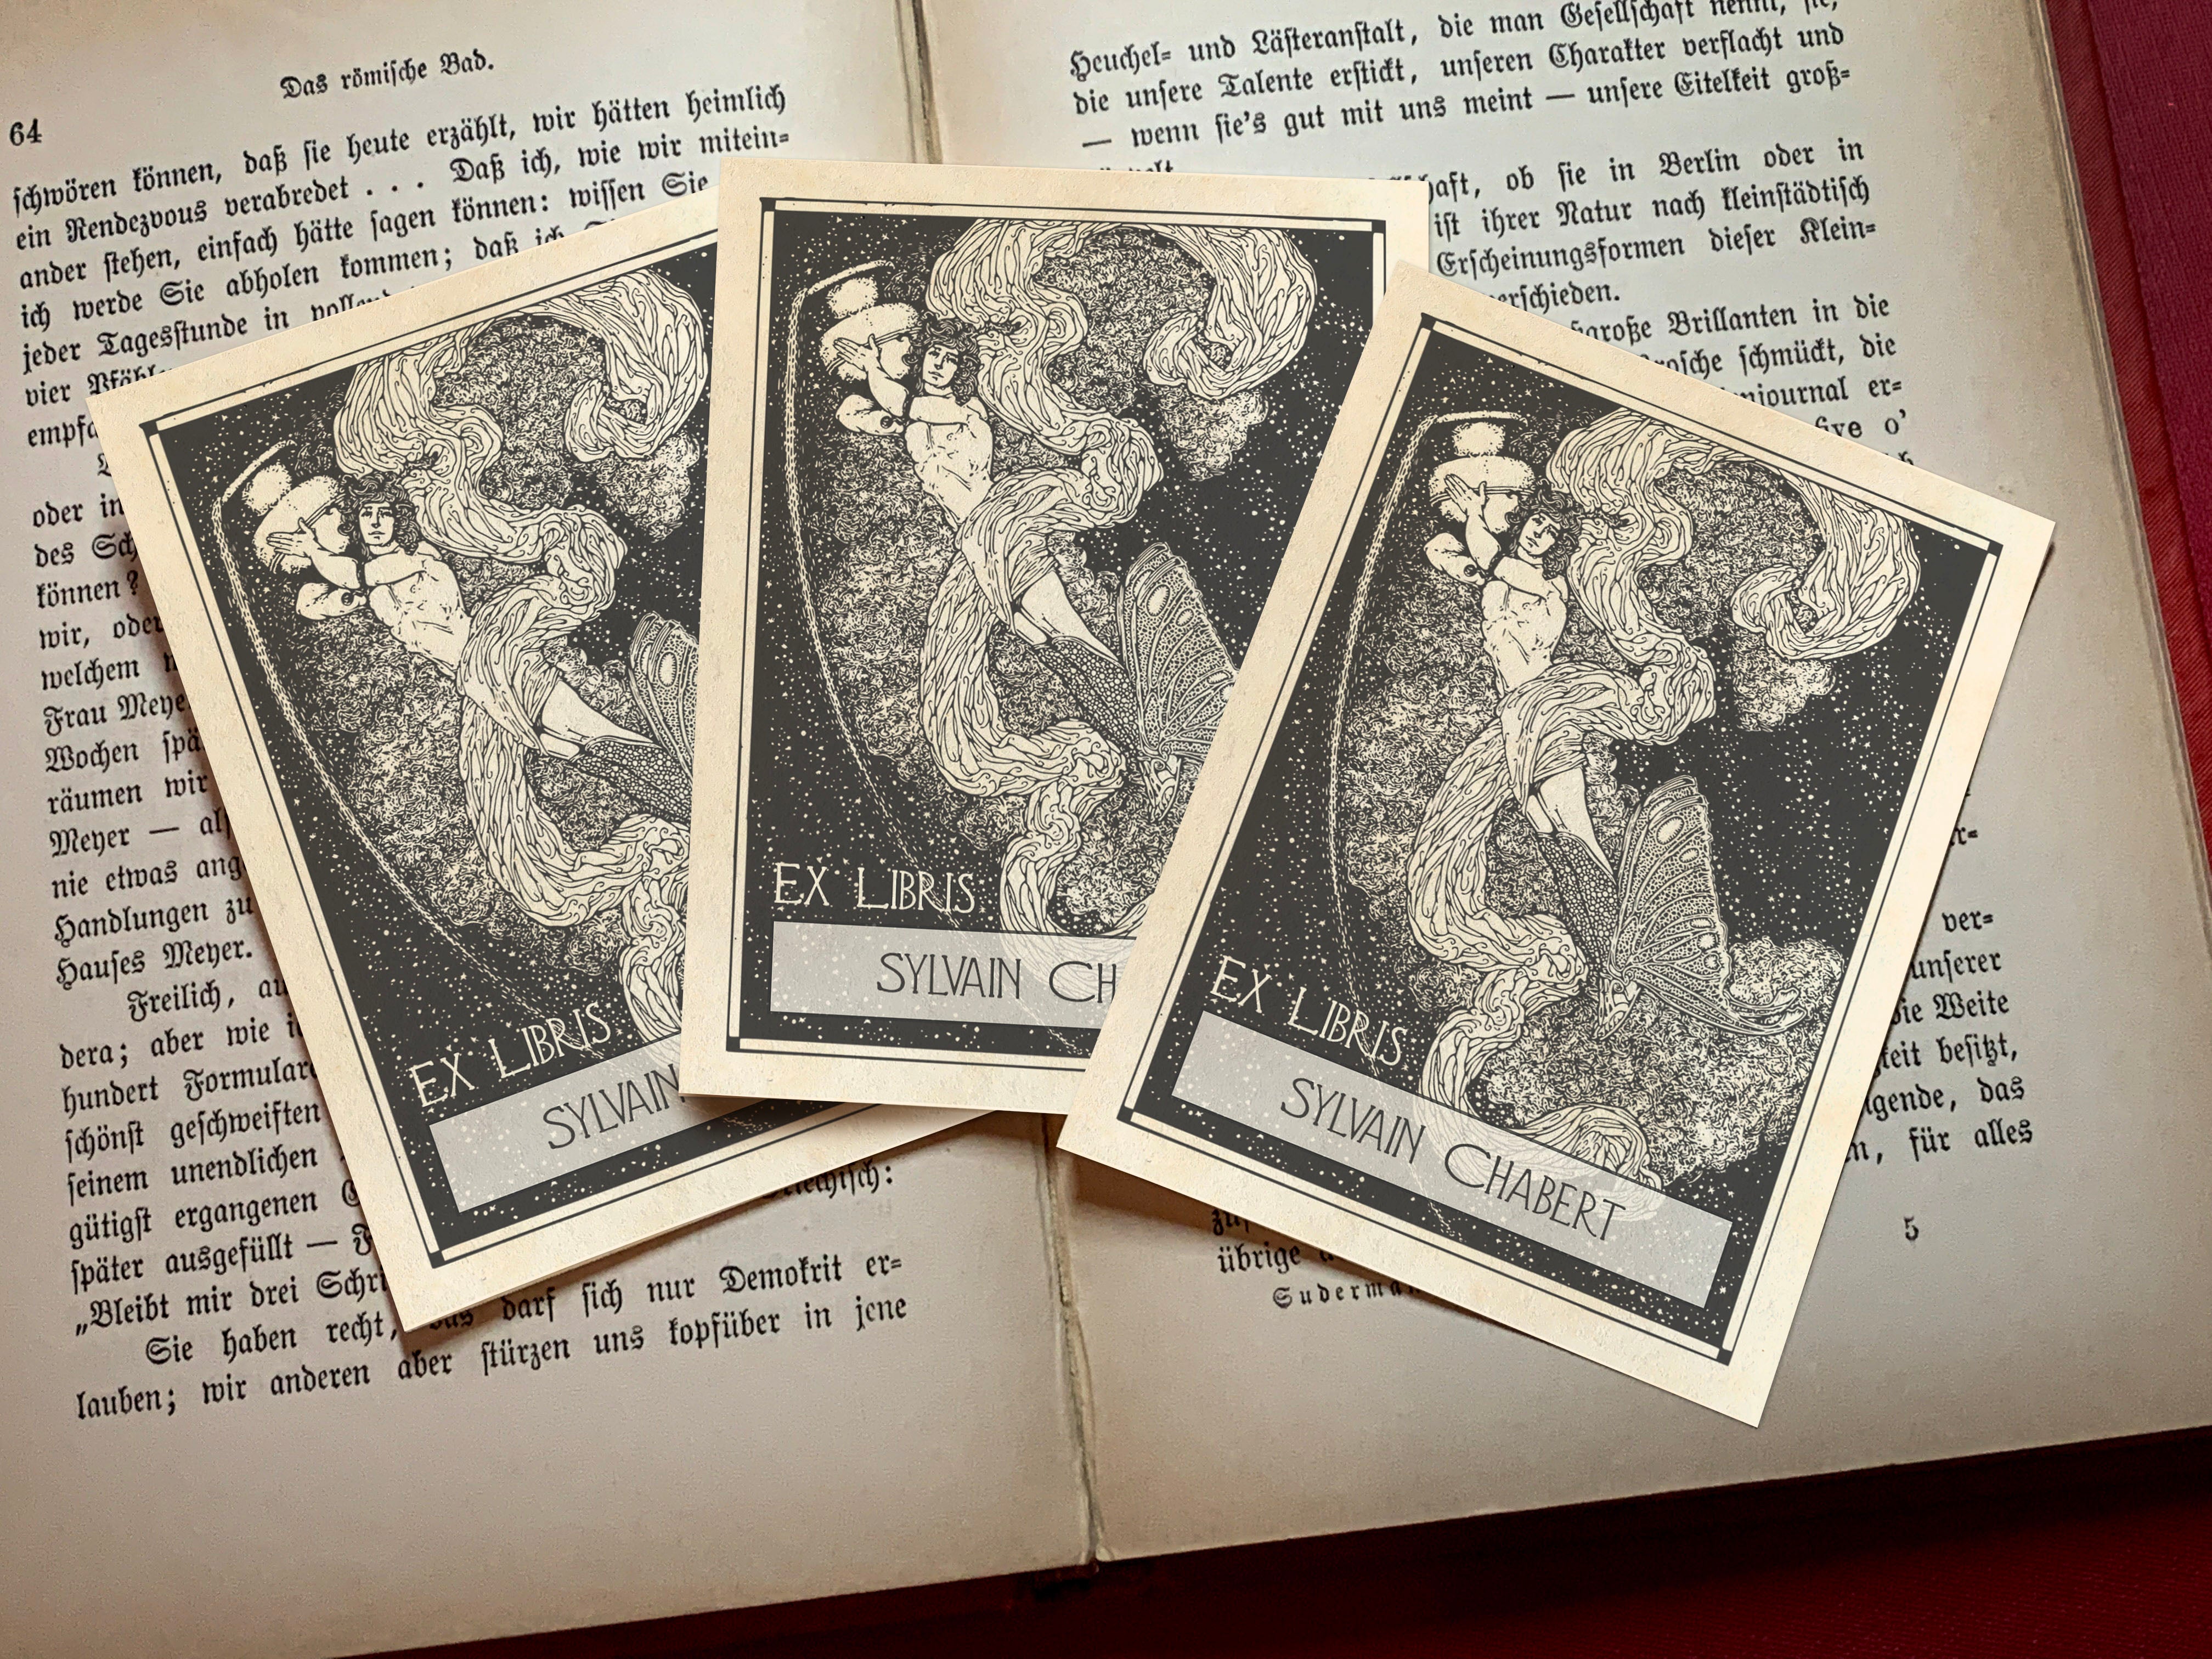 Age of Aquarius, Personalized Celestial Ex-Libris Bookplates, Crafted on Traditional Gummed Paper, 3in x 4in, Set of 30